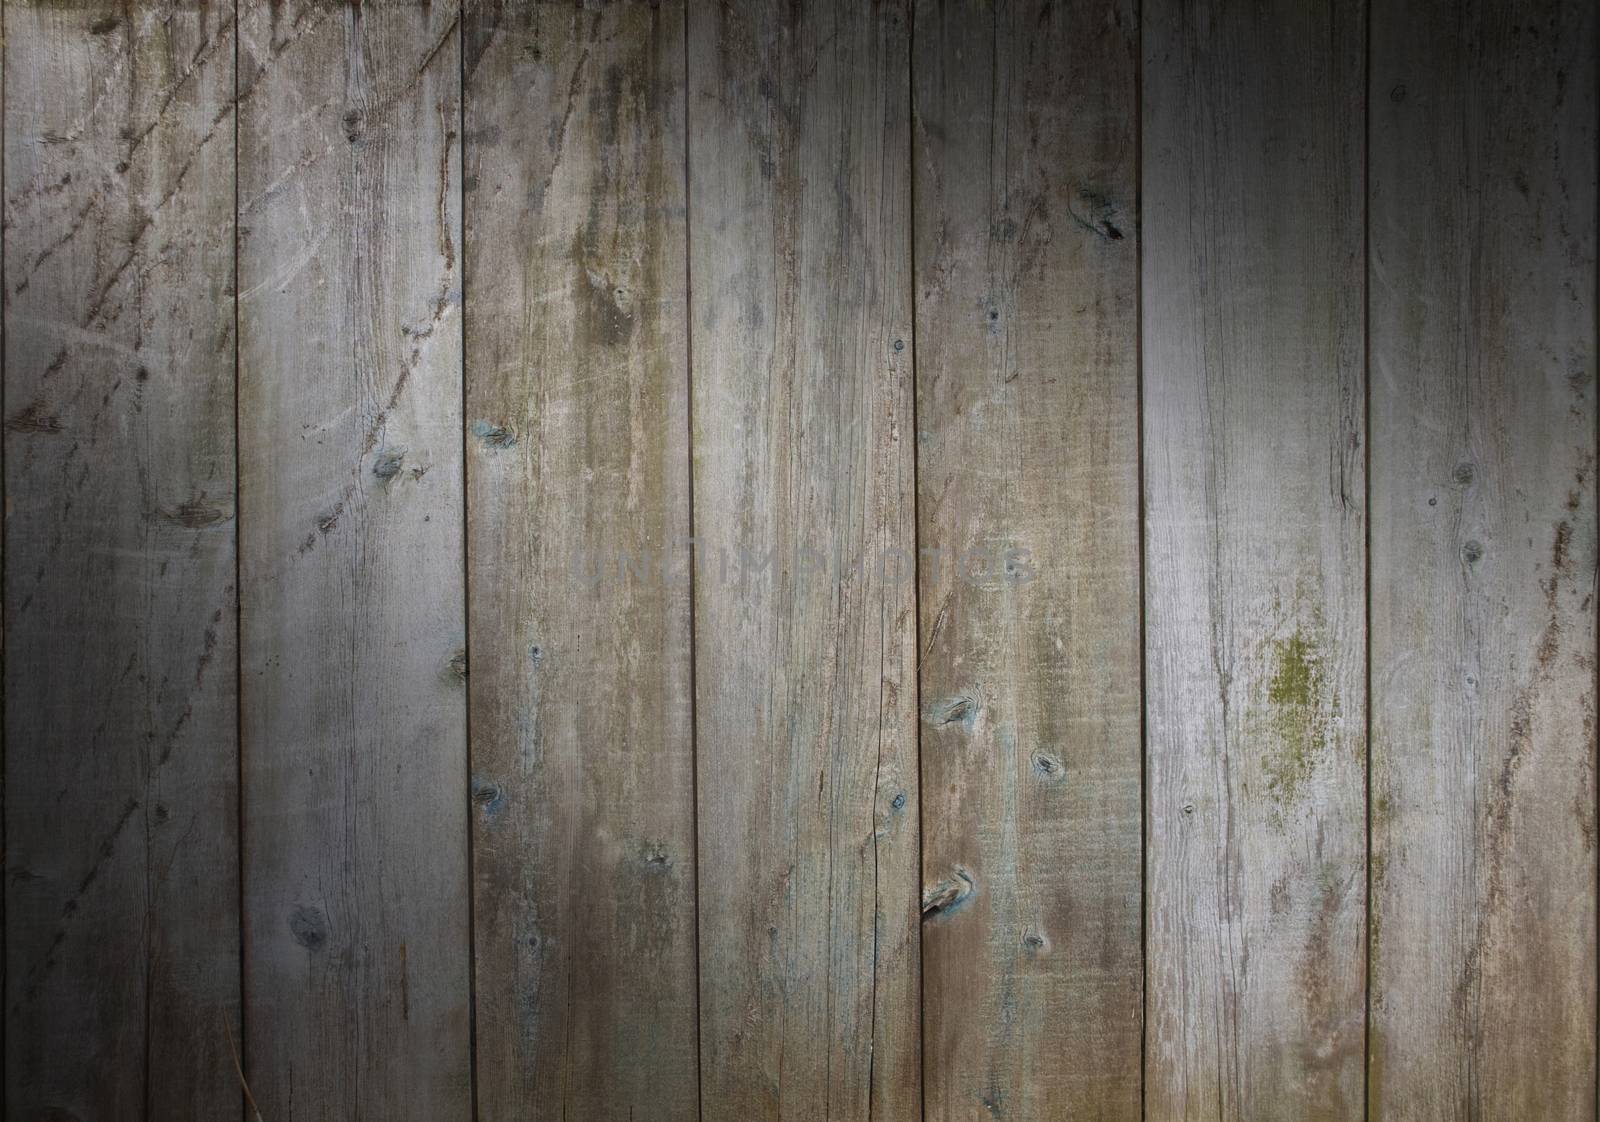 Distressed wooden background with weathered boards by Balefire9